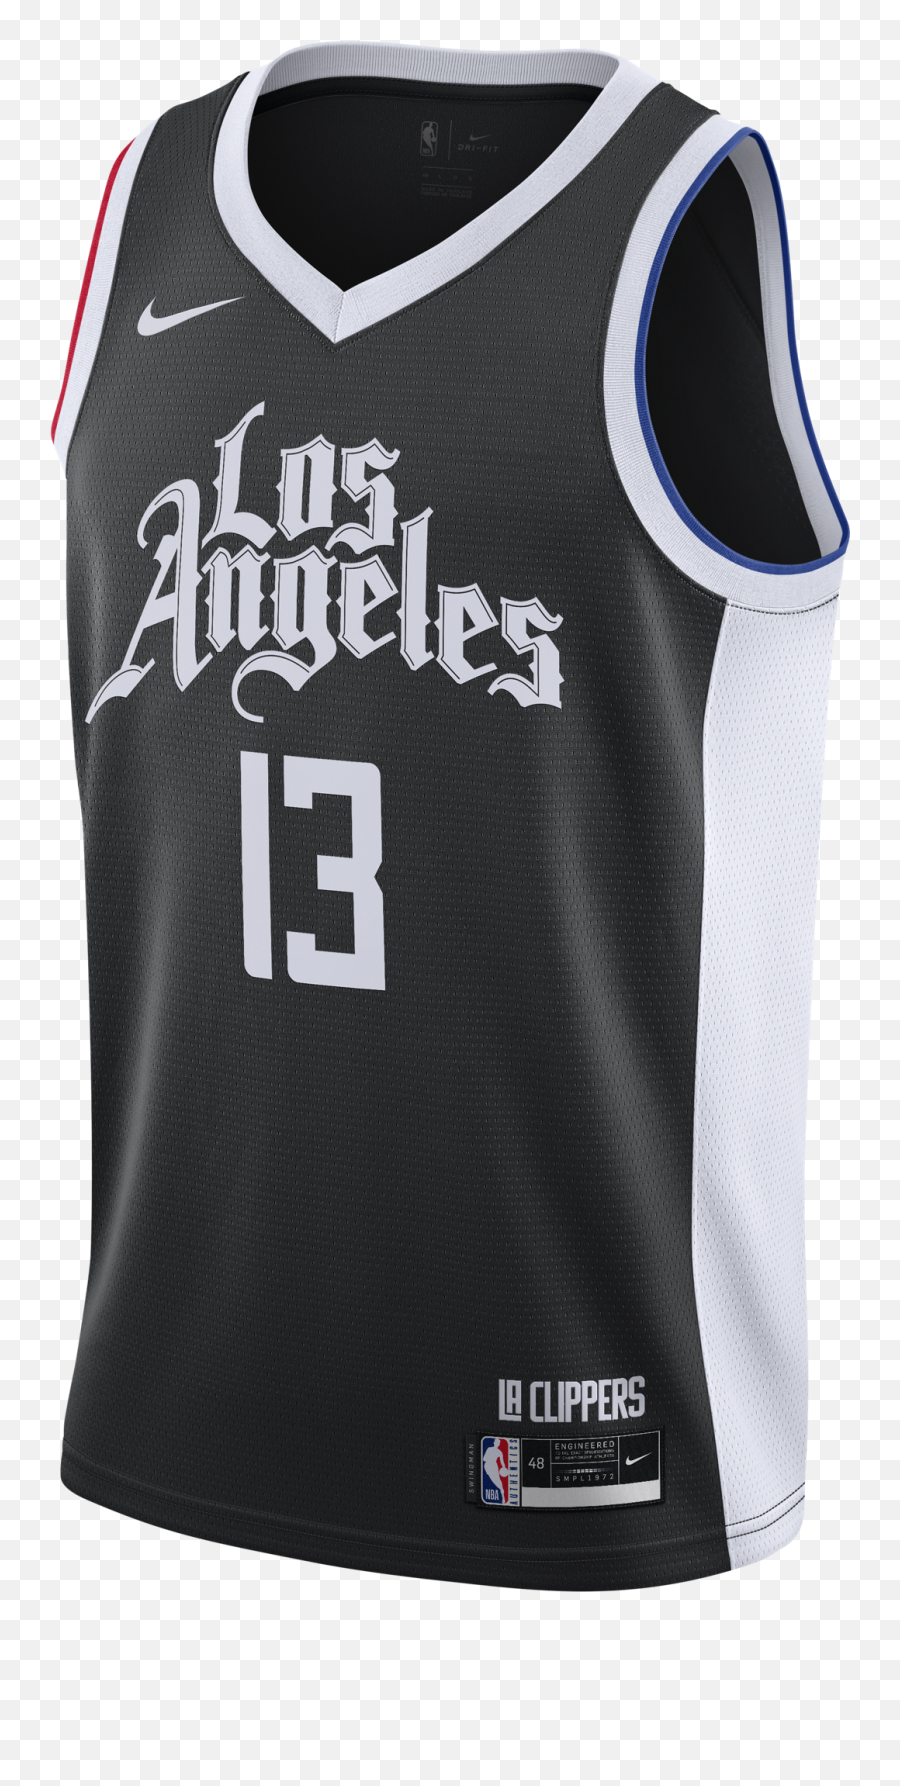 Nike Nba Los Angeles Clippers City Edition Swingman Jersey - Maillot Paul George Clippers Emoji,Los Angeles Clippers Logo